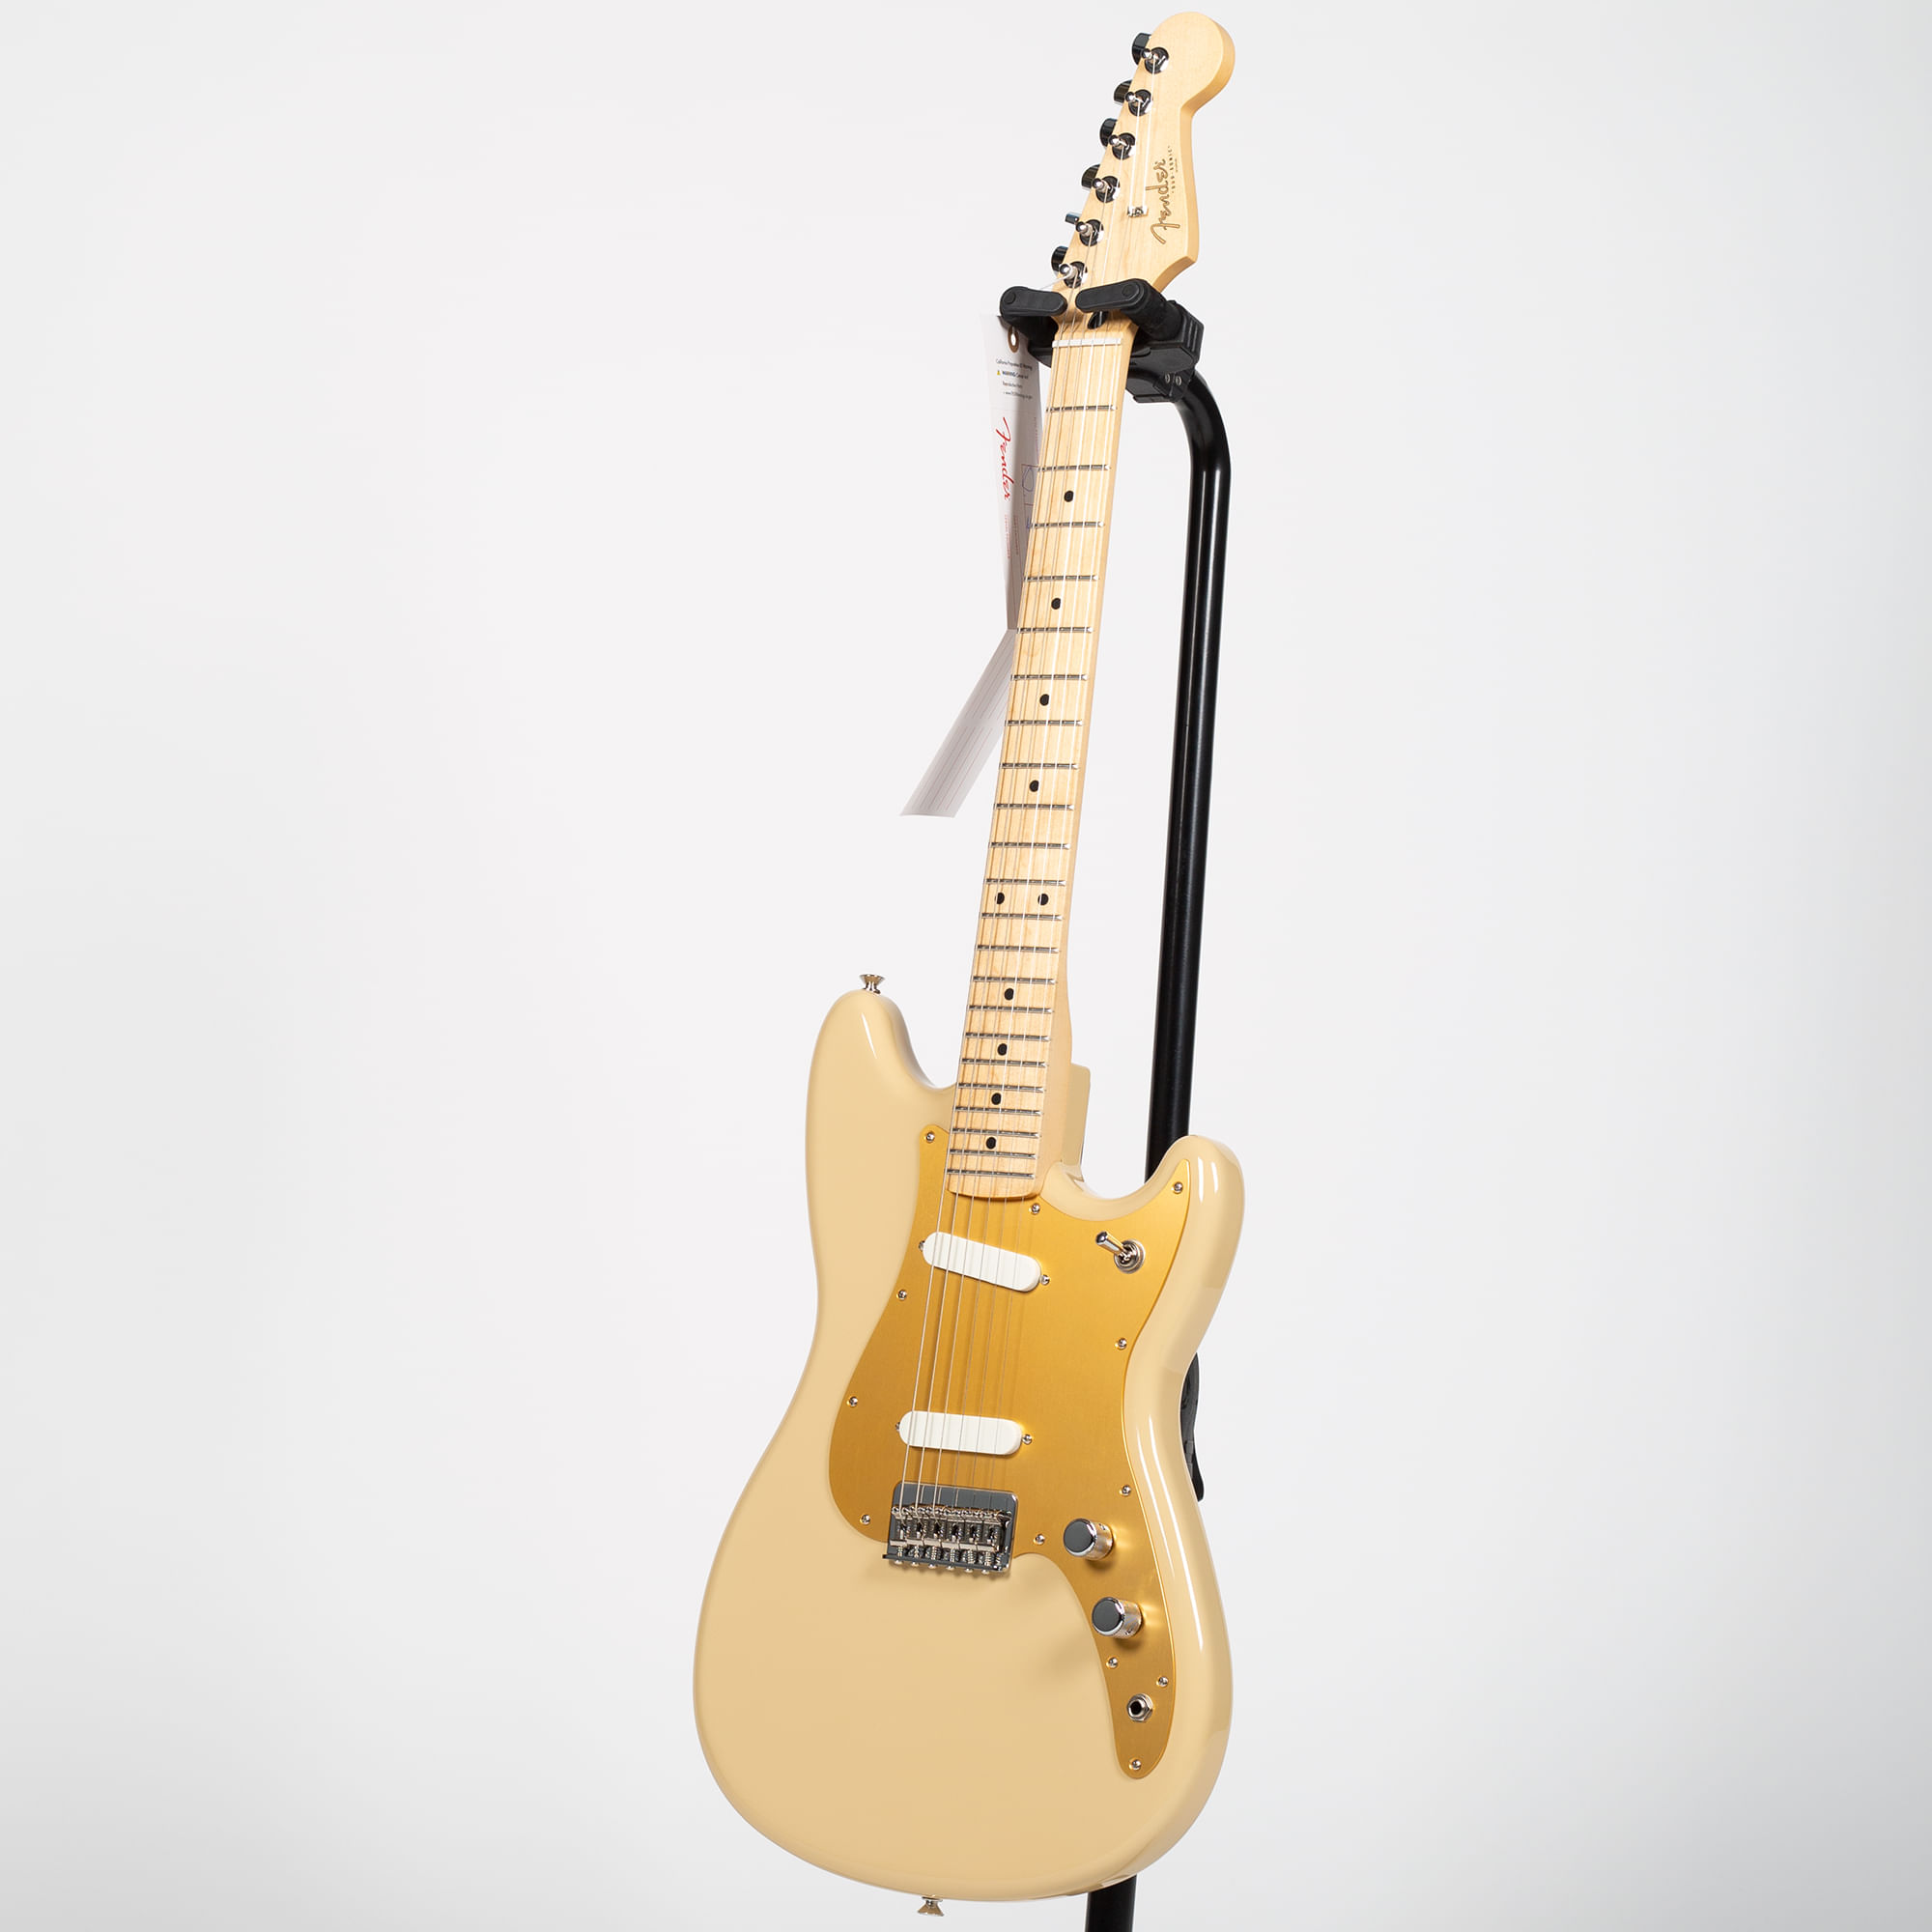 Fender Player Duo-Sonic Electric Guitar - Desert Sand - Cosmo Music